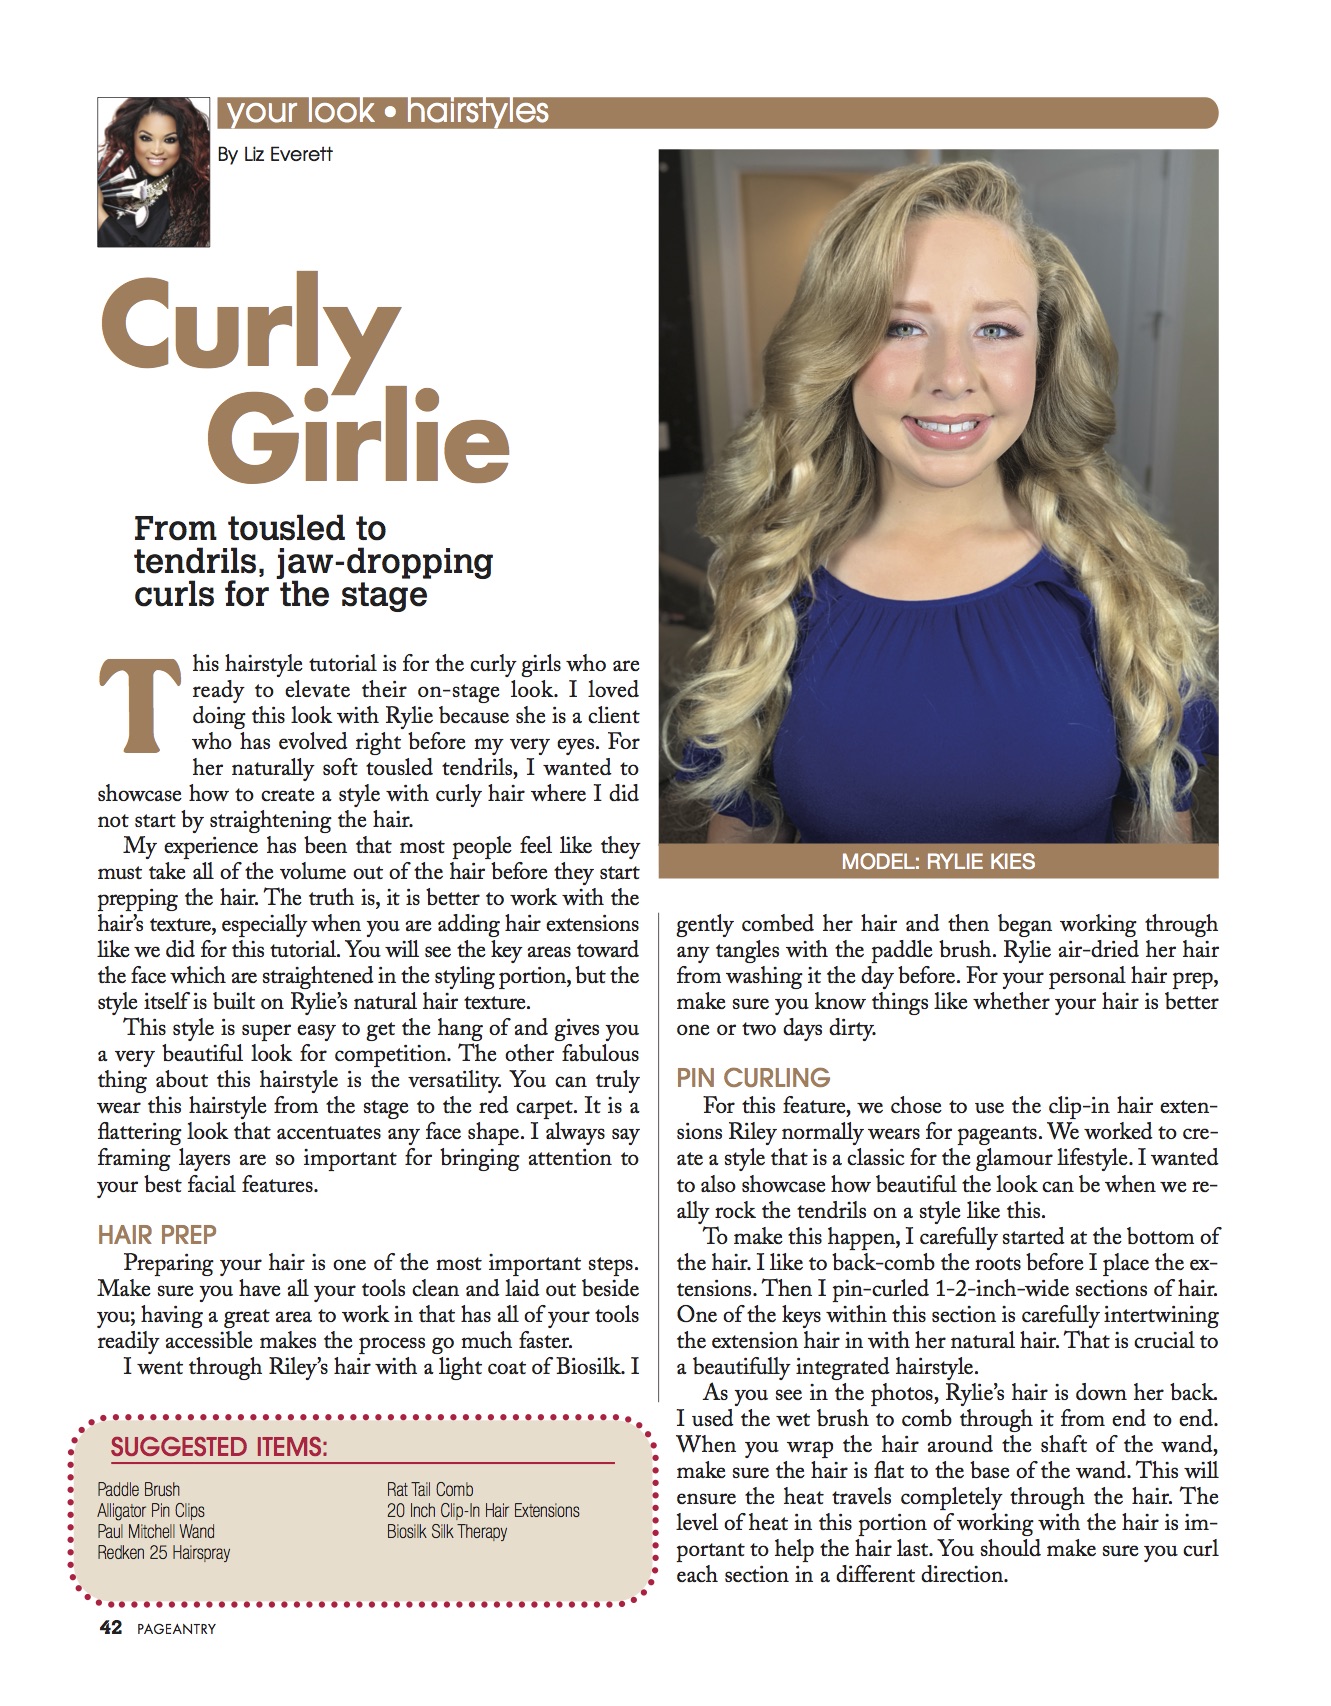 Curly Girlie - Pageantry Magazine